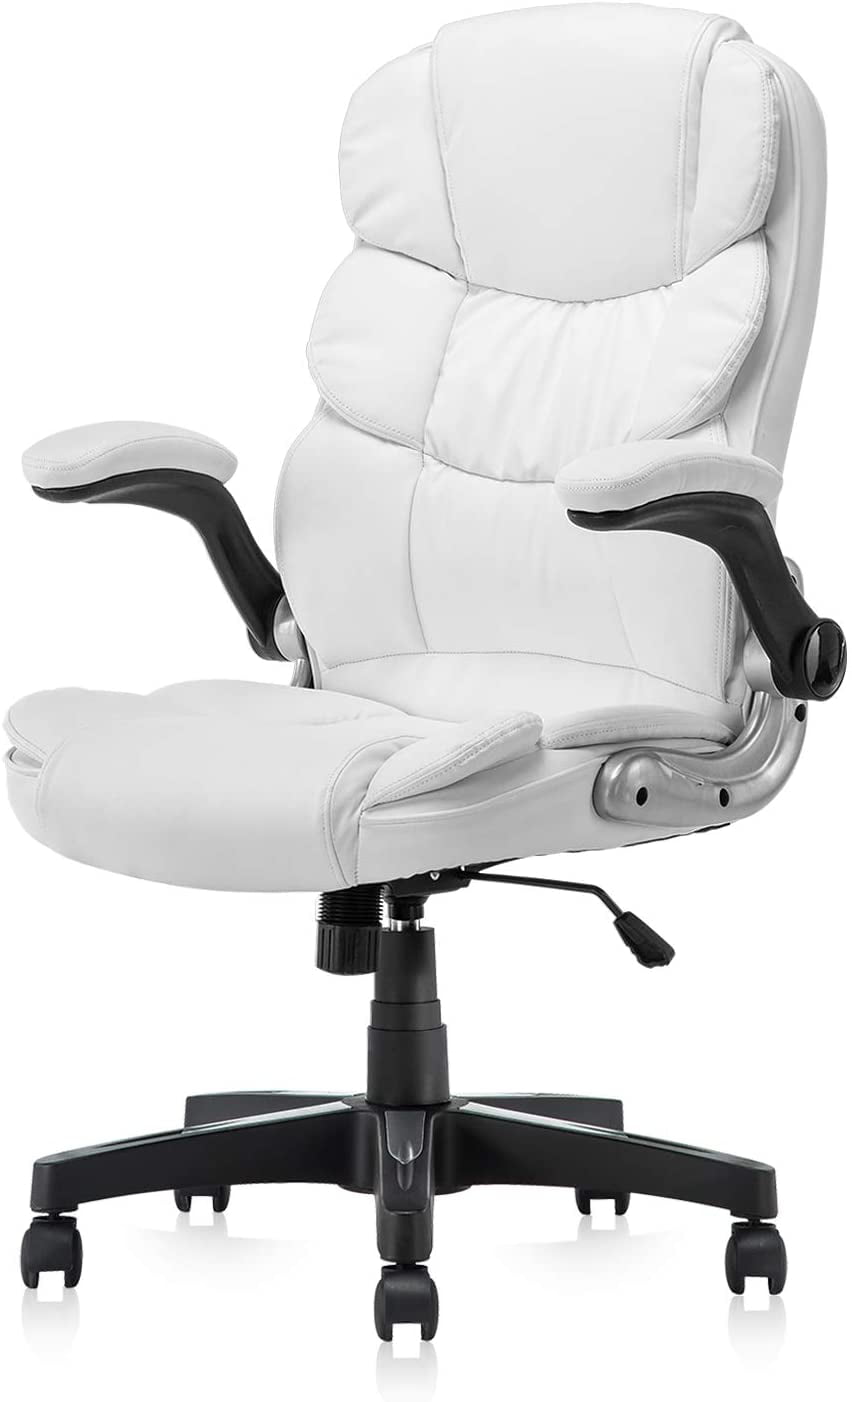 Wheels Seatingplus White Office Chair Ergonomic PU Leather Office Chair with Flip-up Arms High Back Home Office Desk Chair of American Flag Pattern with Back Support 